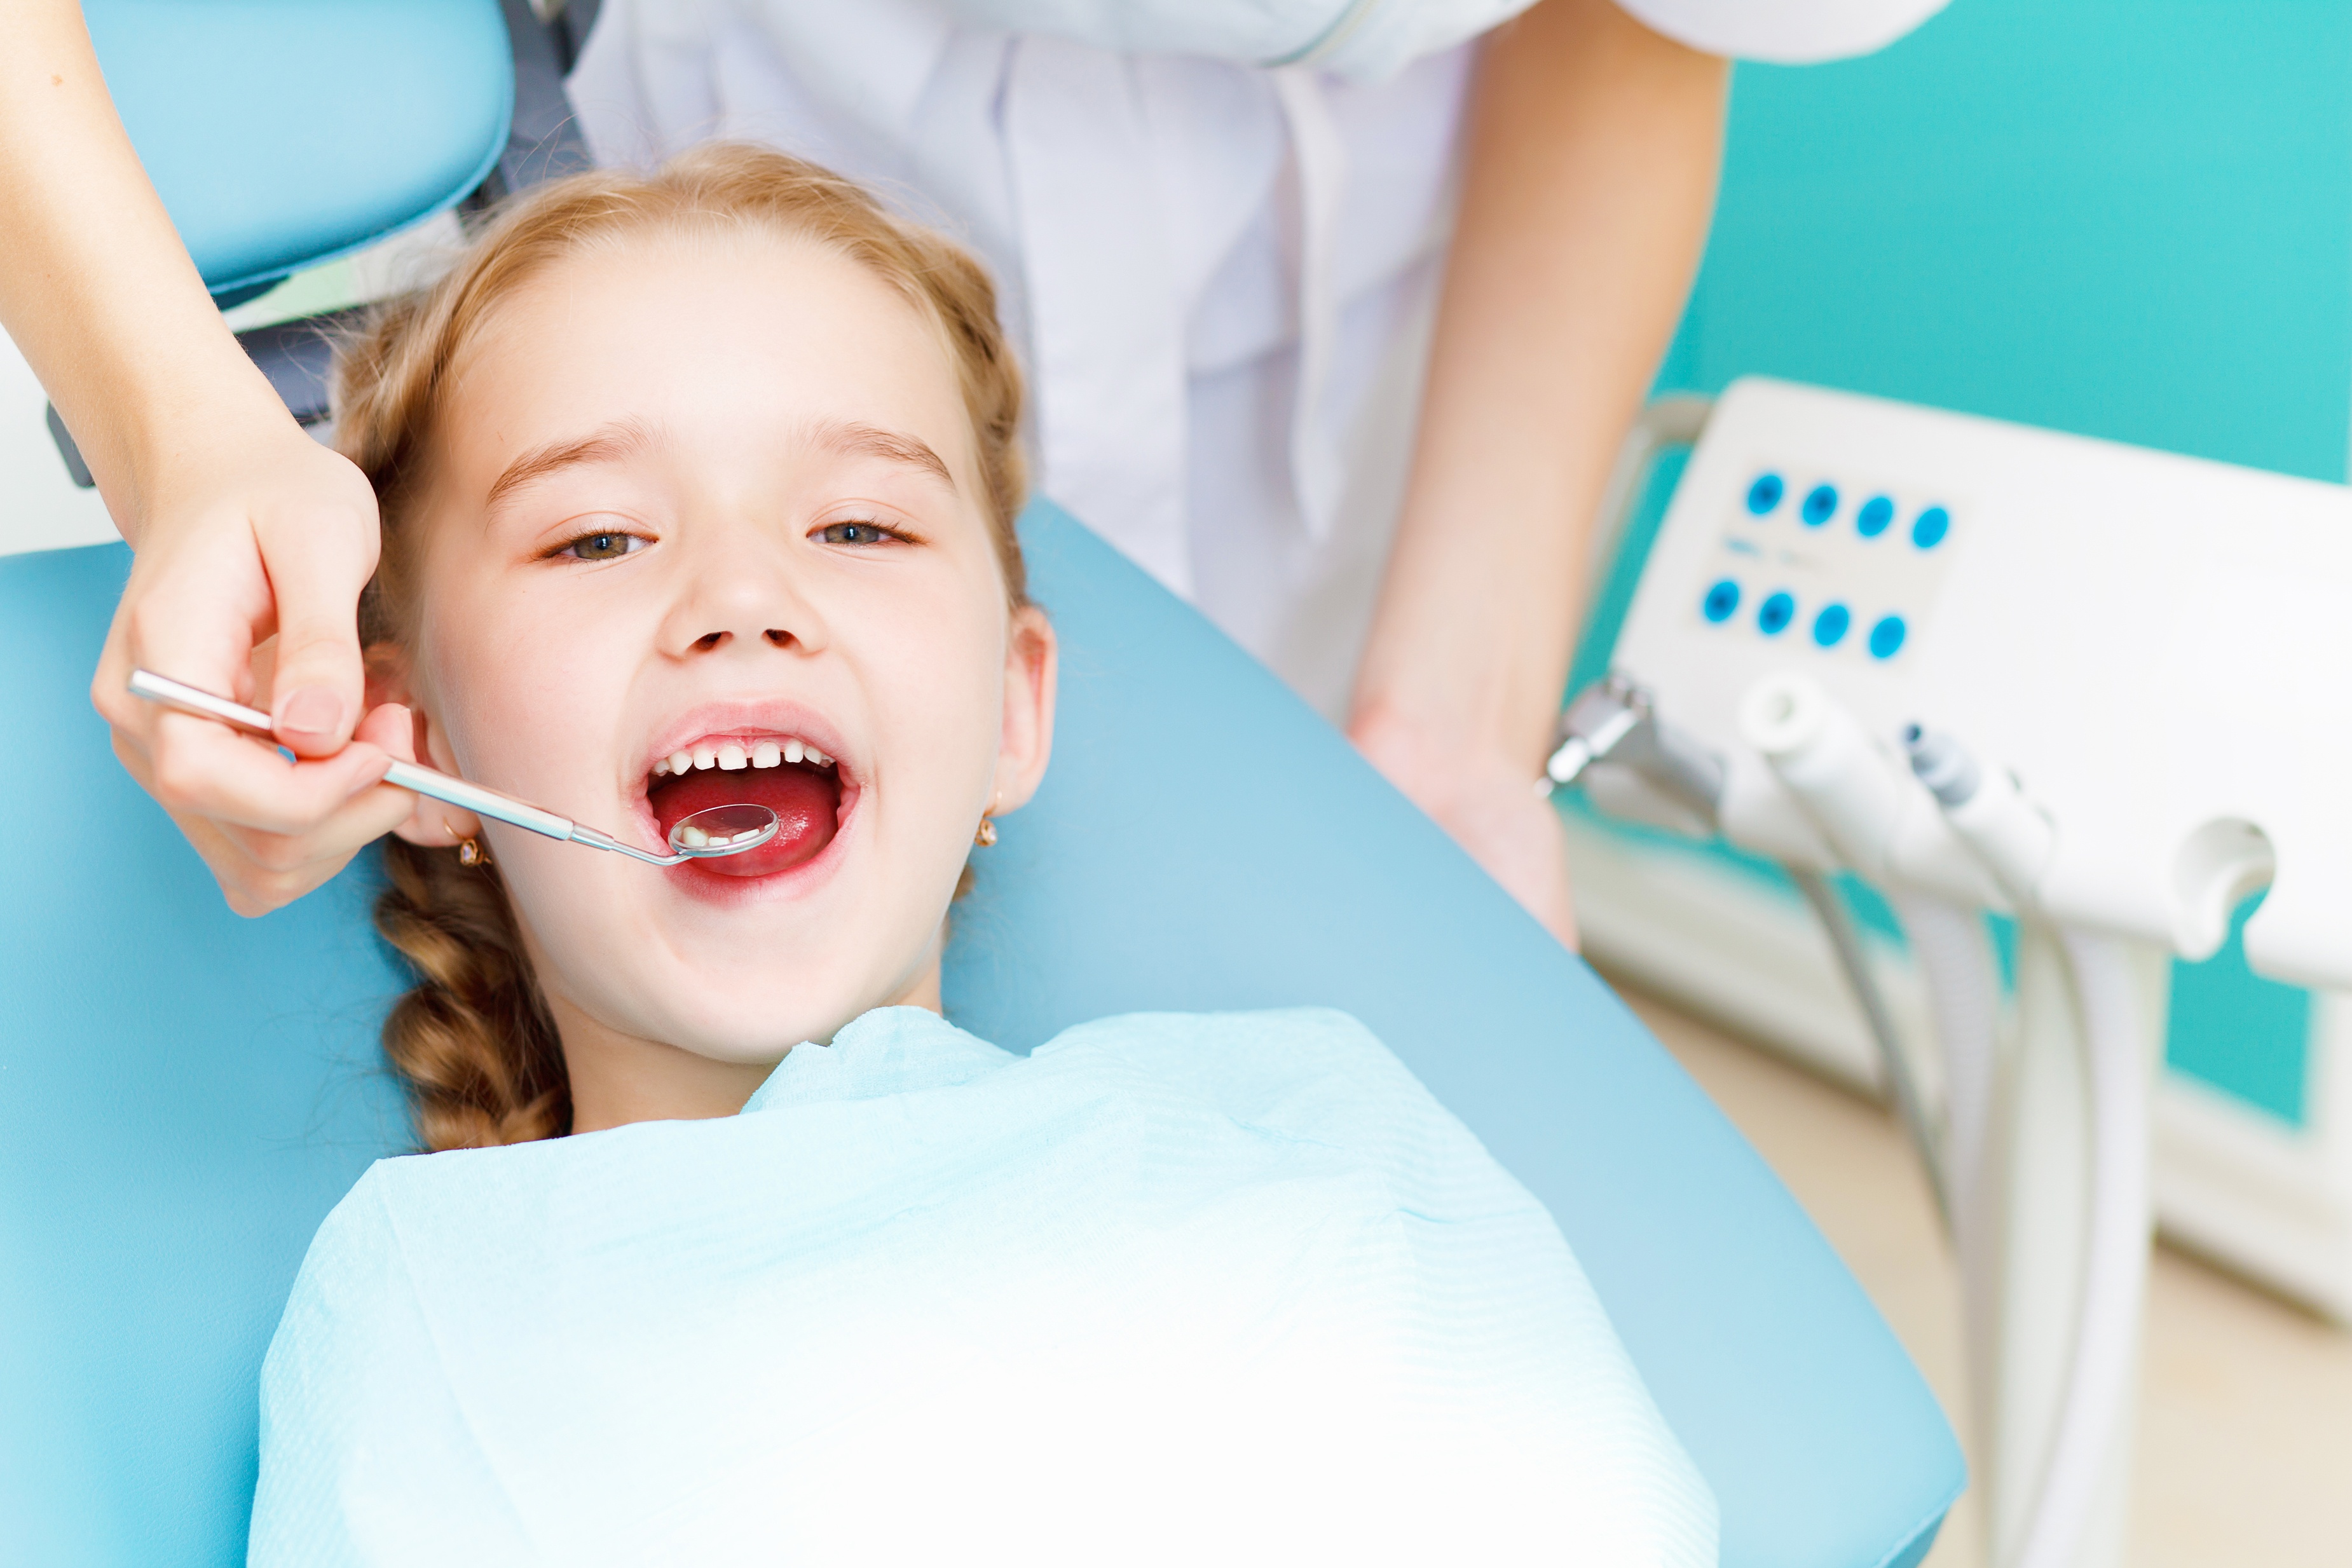 An Experienced Dentist in Dutchess County, NY, Can Help You Resolve Dental Issues Today